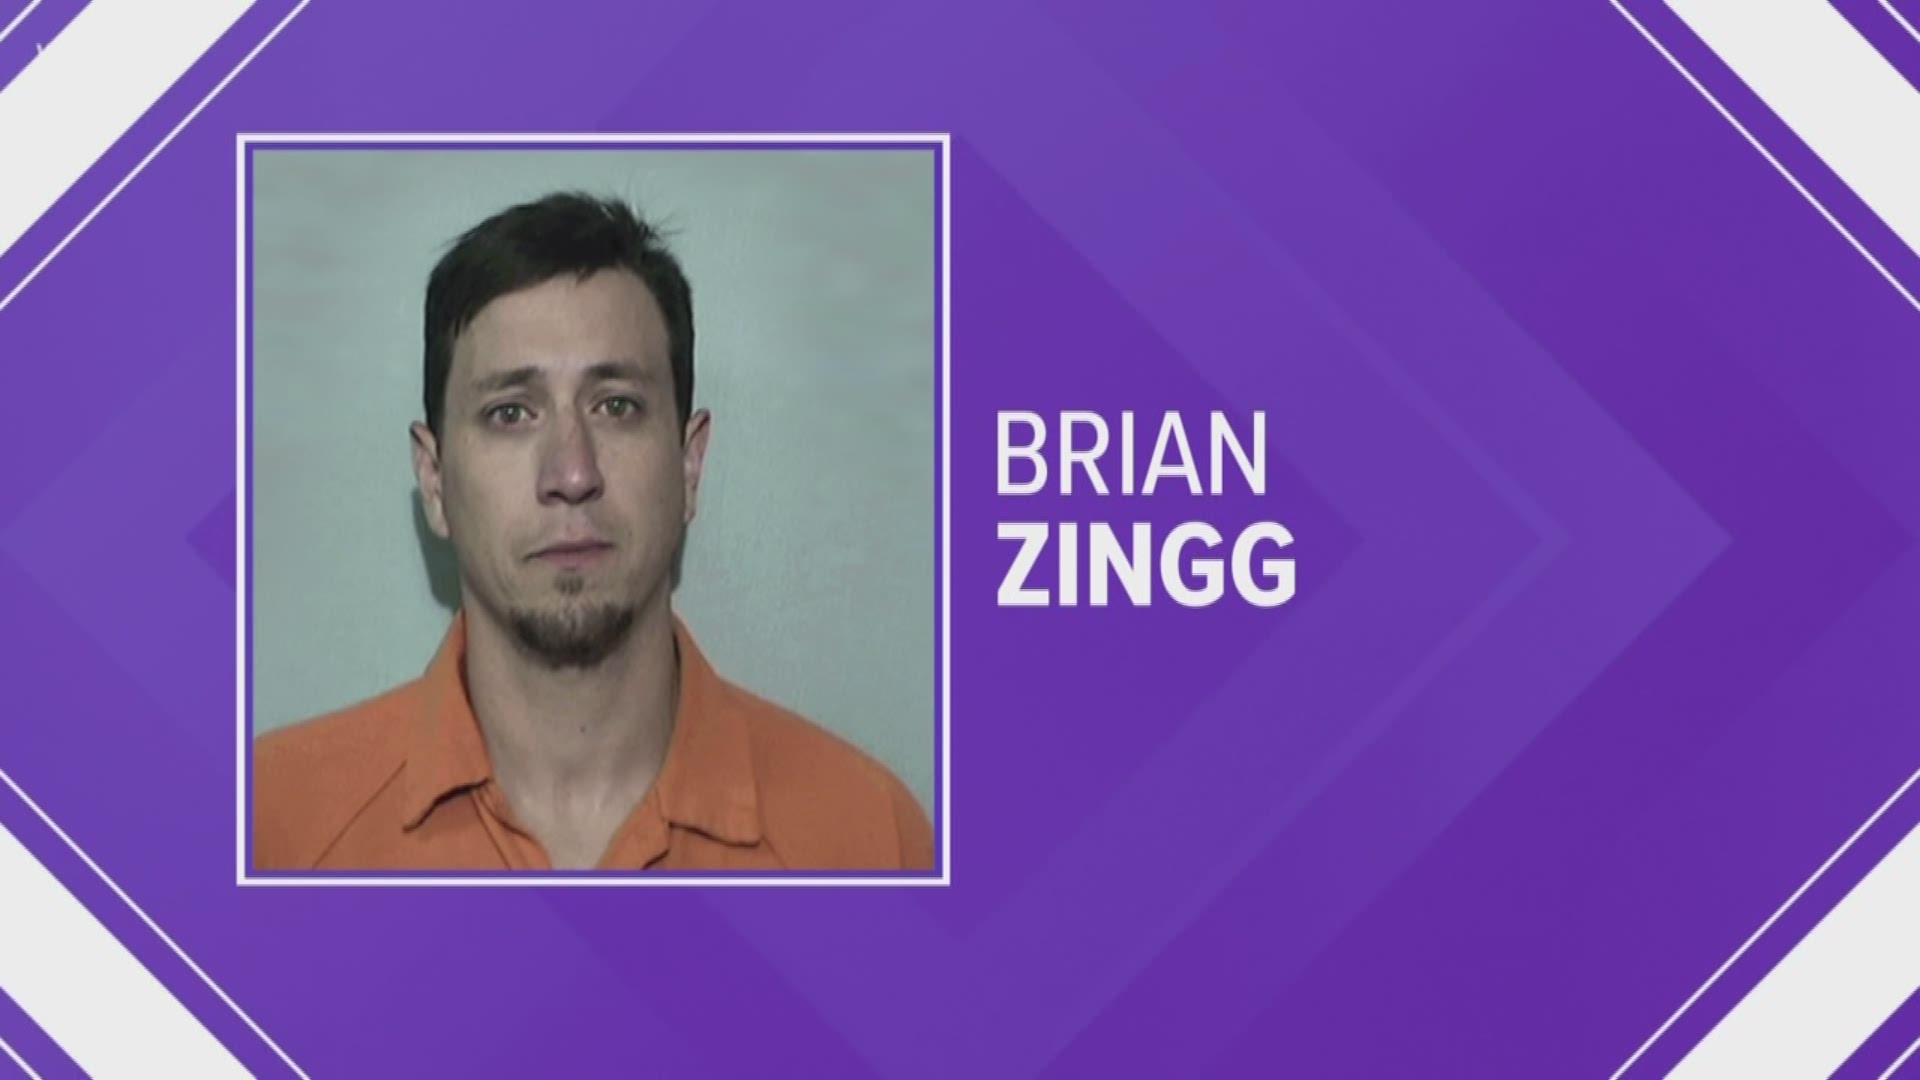 Brian Zingg was charged with involuntary manslaughter after a two-year-old child in his care was seriously hurt and eventually died.